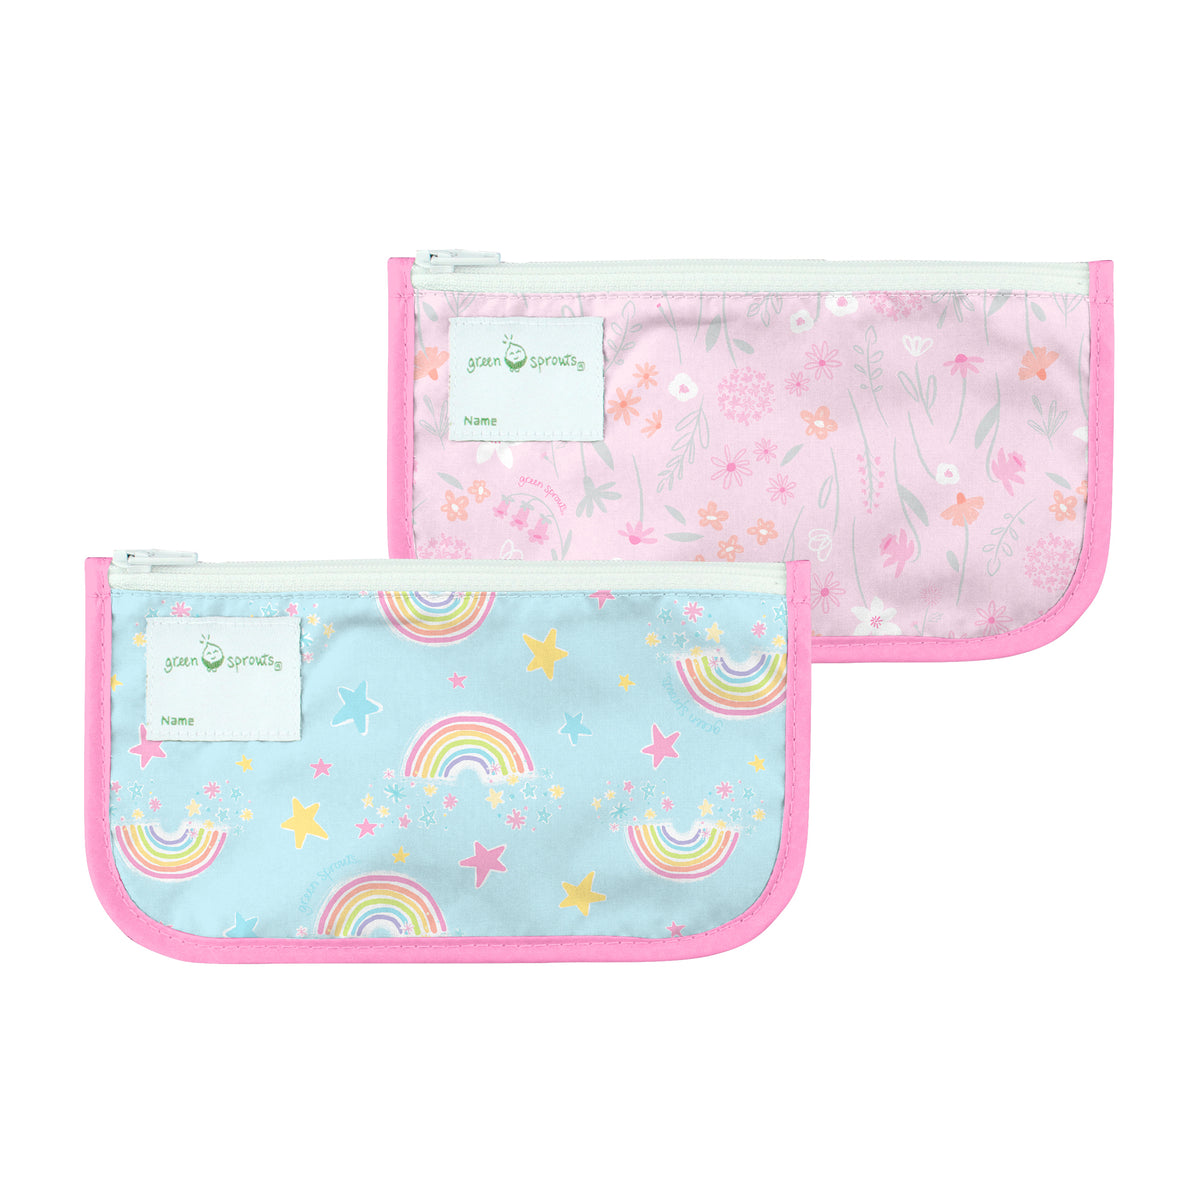 Green Sprouts Reusable Snack Bags (2 Pack) Aqua Rainbows/Pink Wildflowers Set